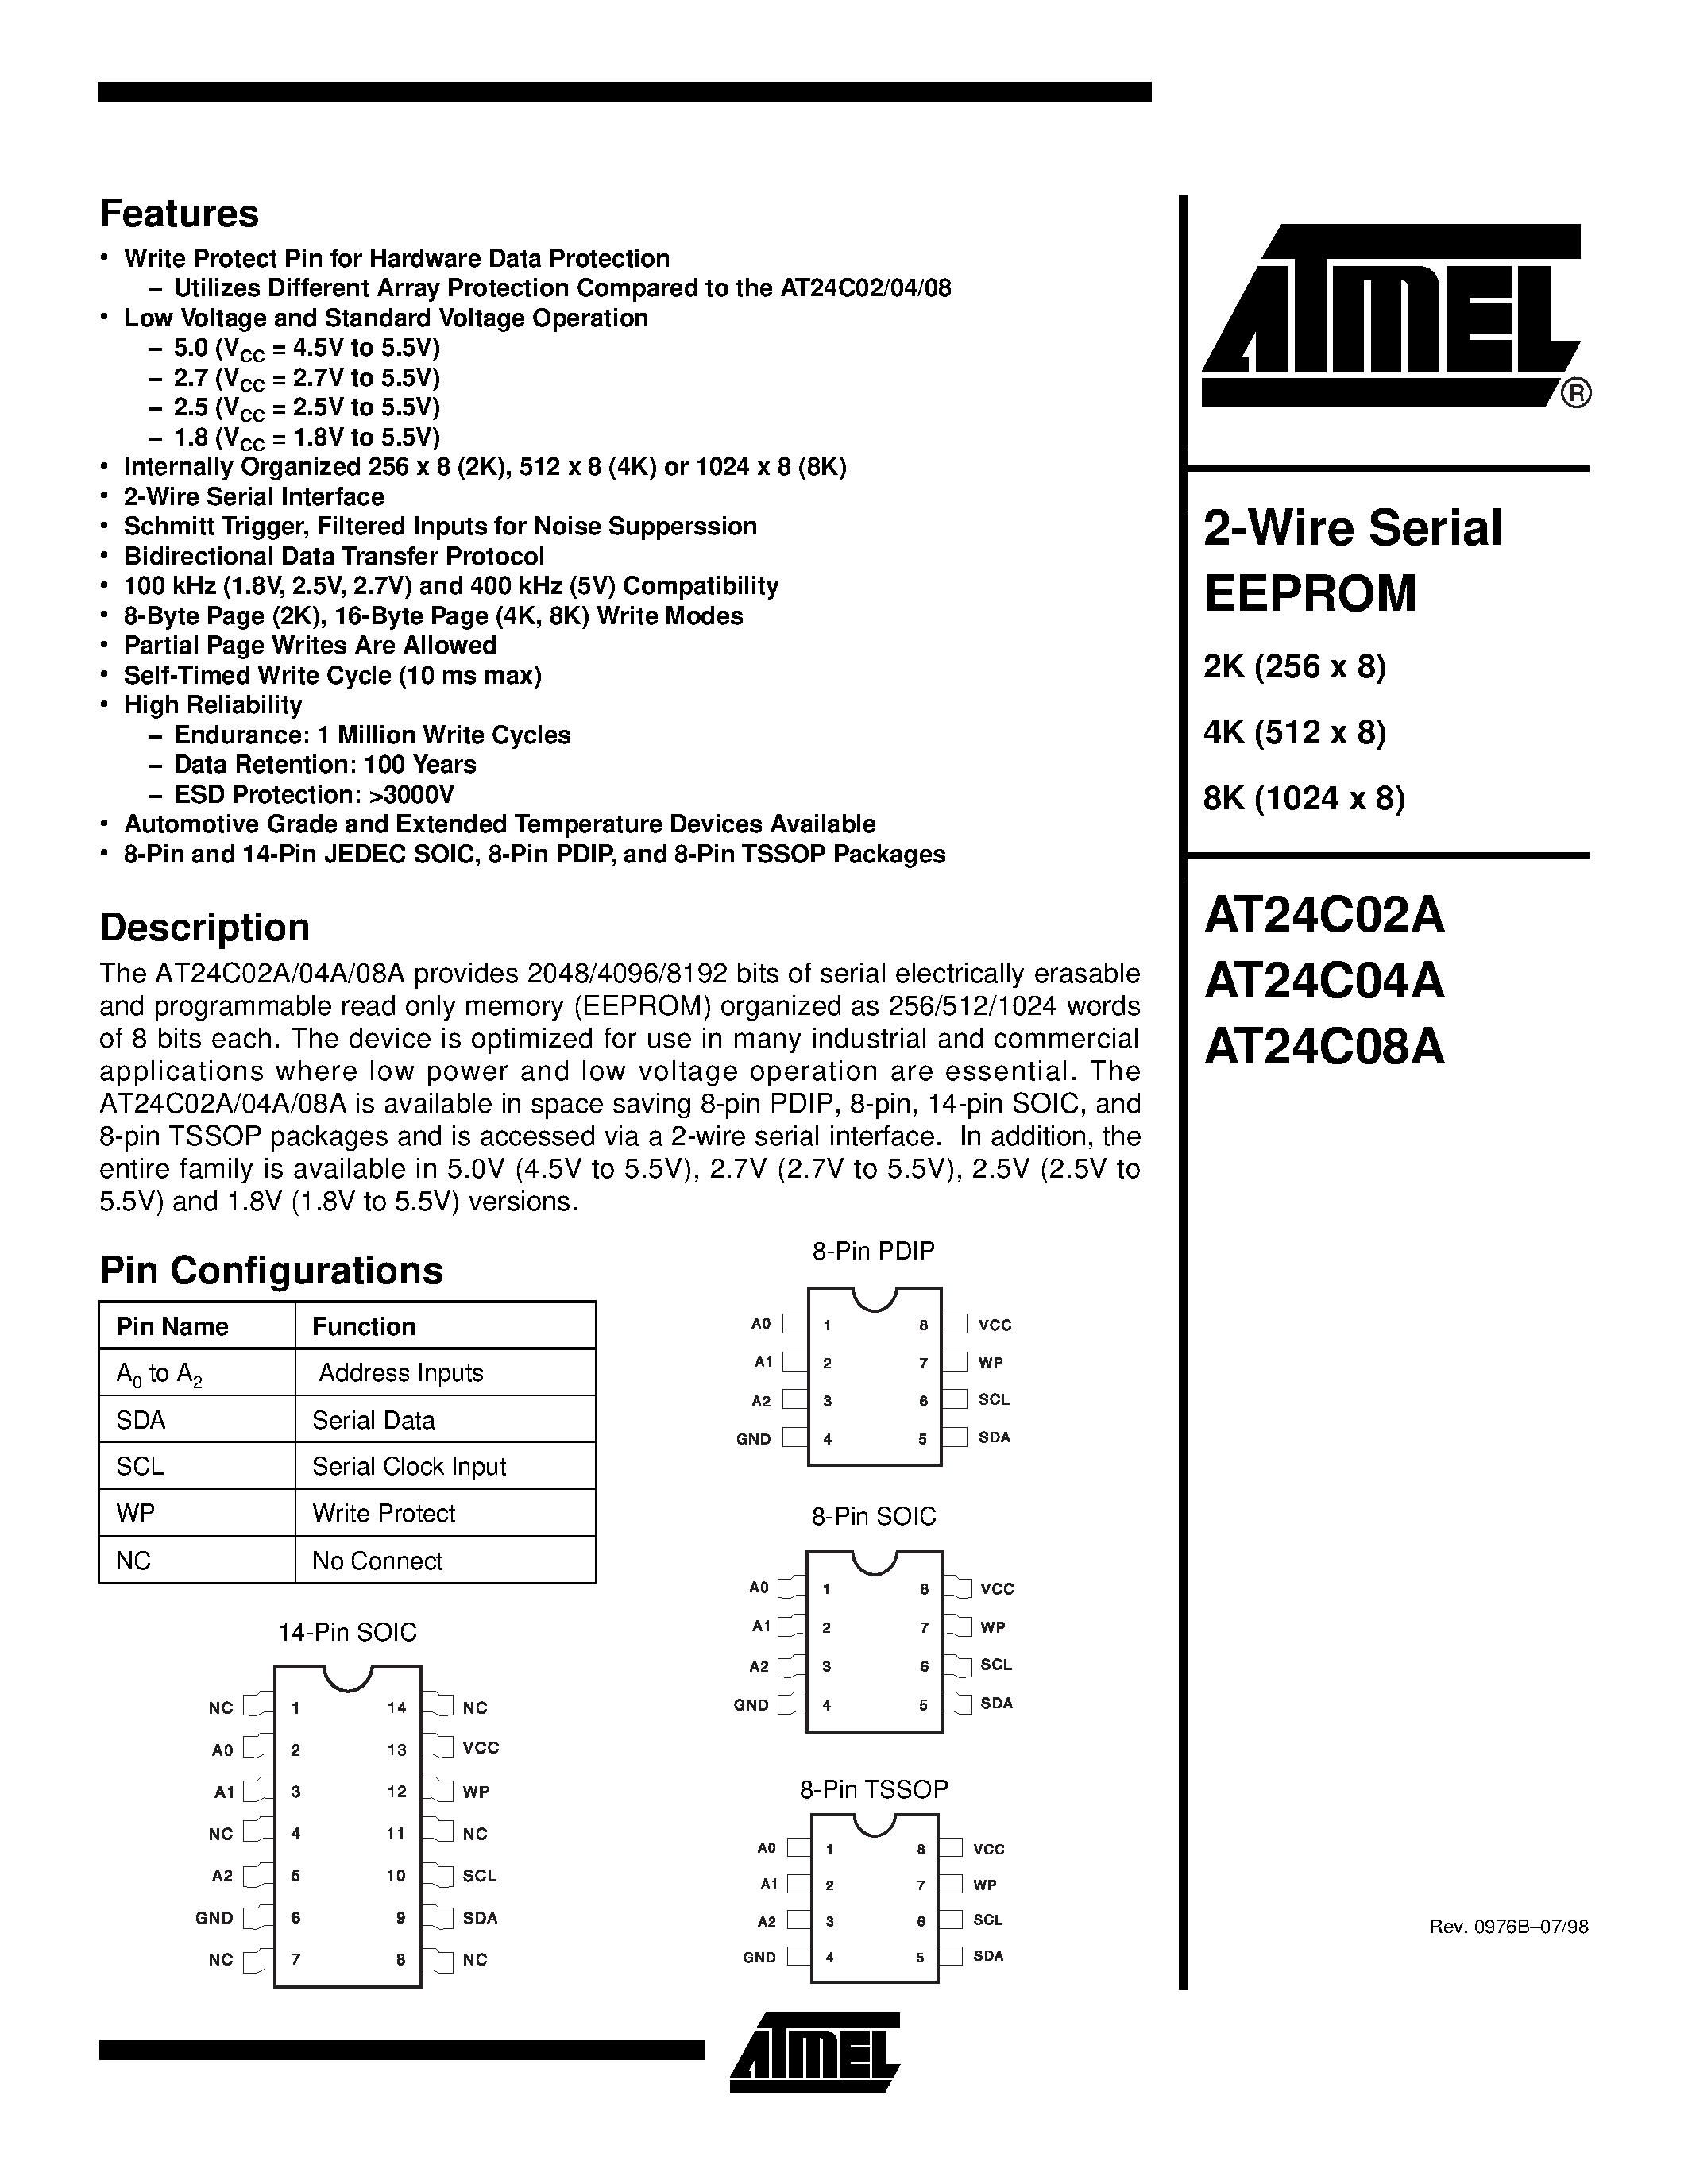 Datasheet AT24C08A-10PC-2.7 - 2-Wire Serial EEPROM page 1